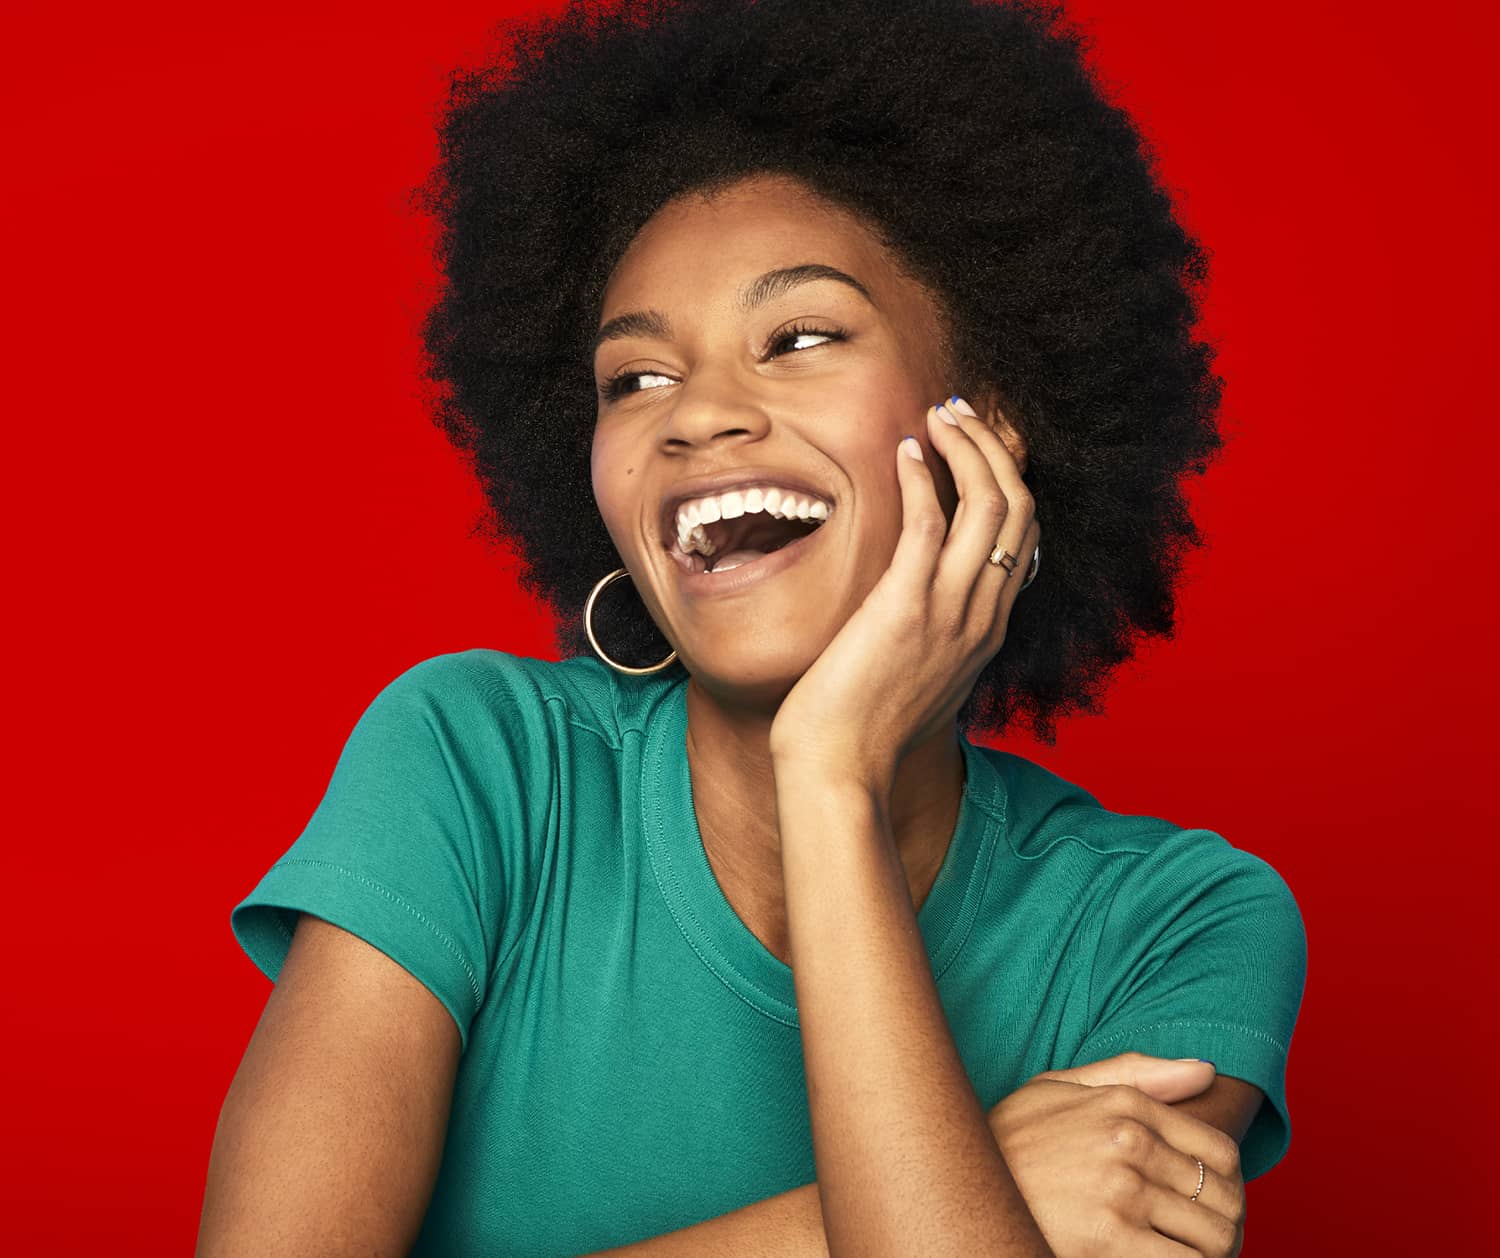 a young Black woman smiling